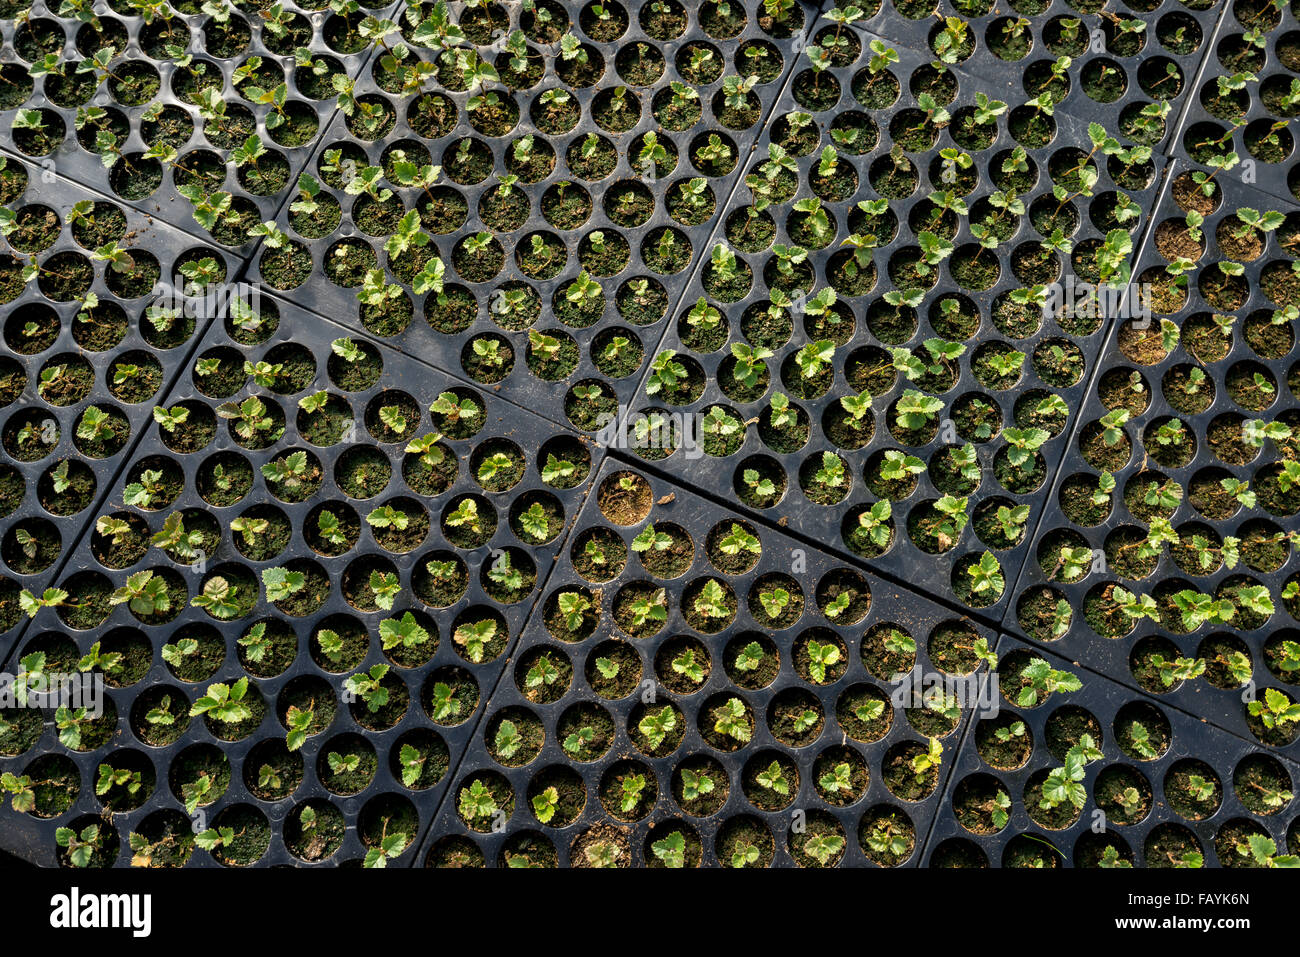 Top view of birch tree seedlings growing in a greenhouse that uses geothermal energy, Gardur, Iceland Stock Photo